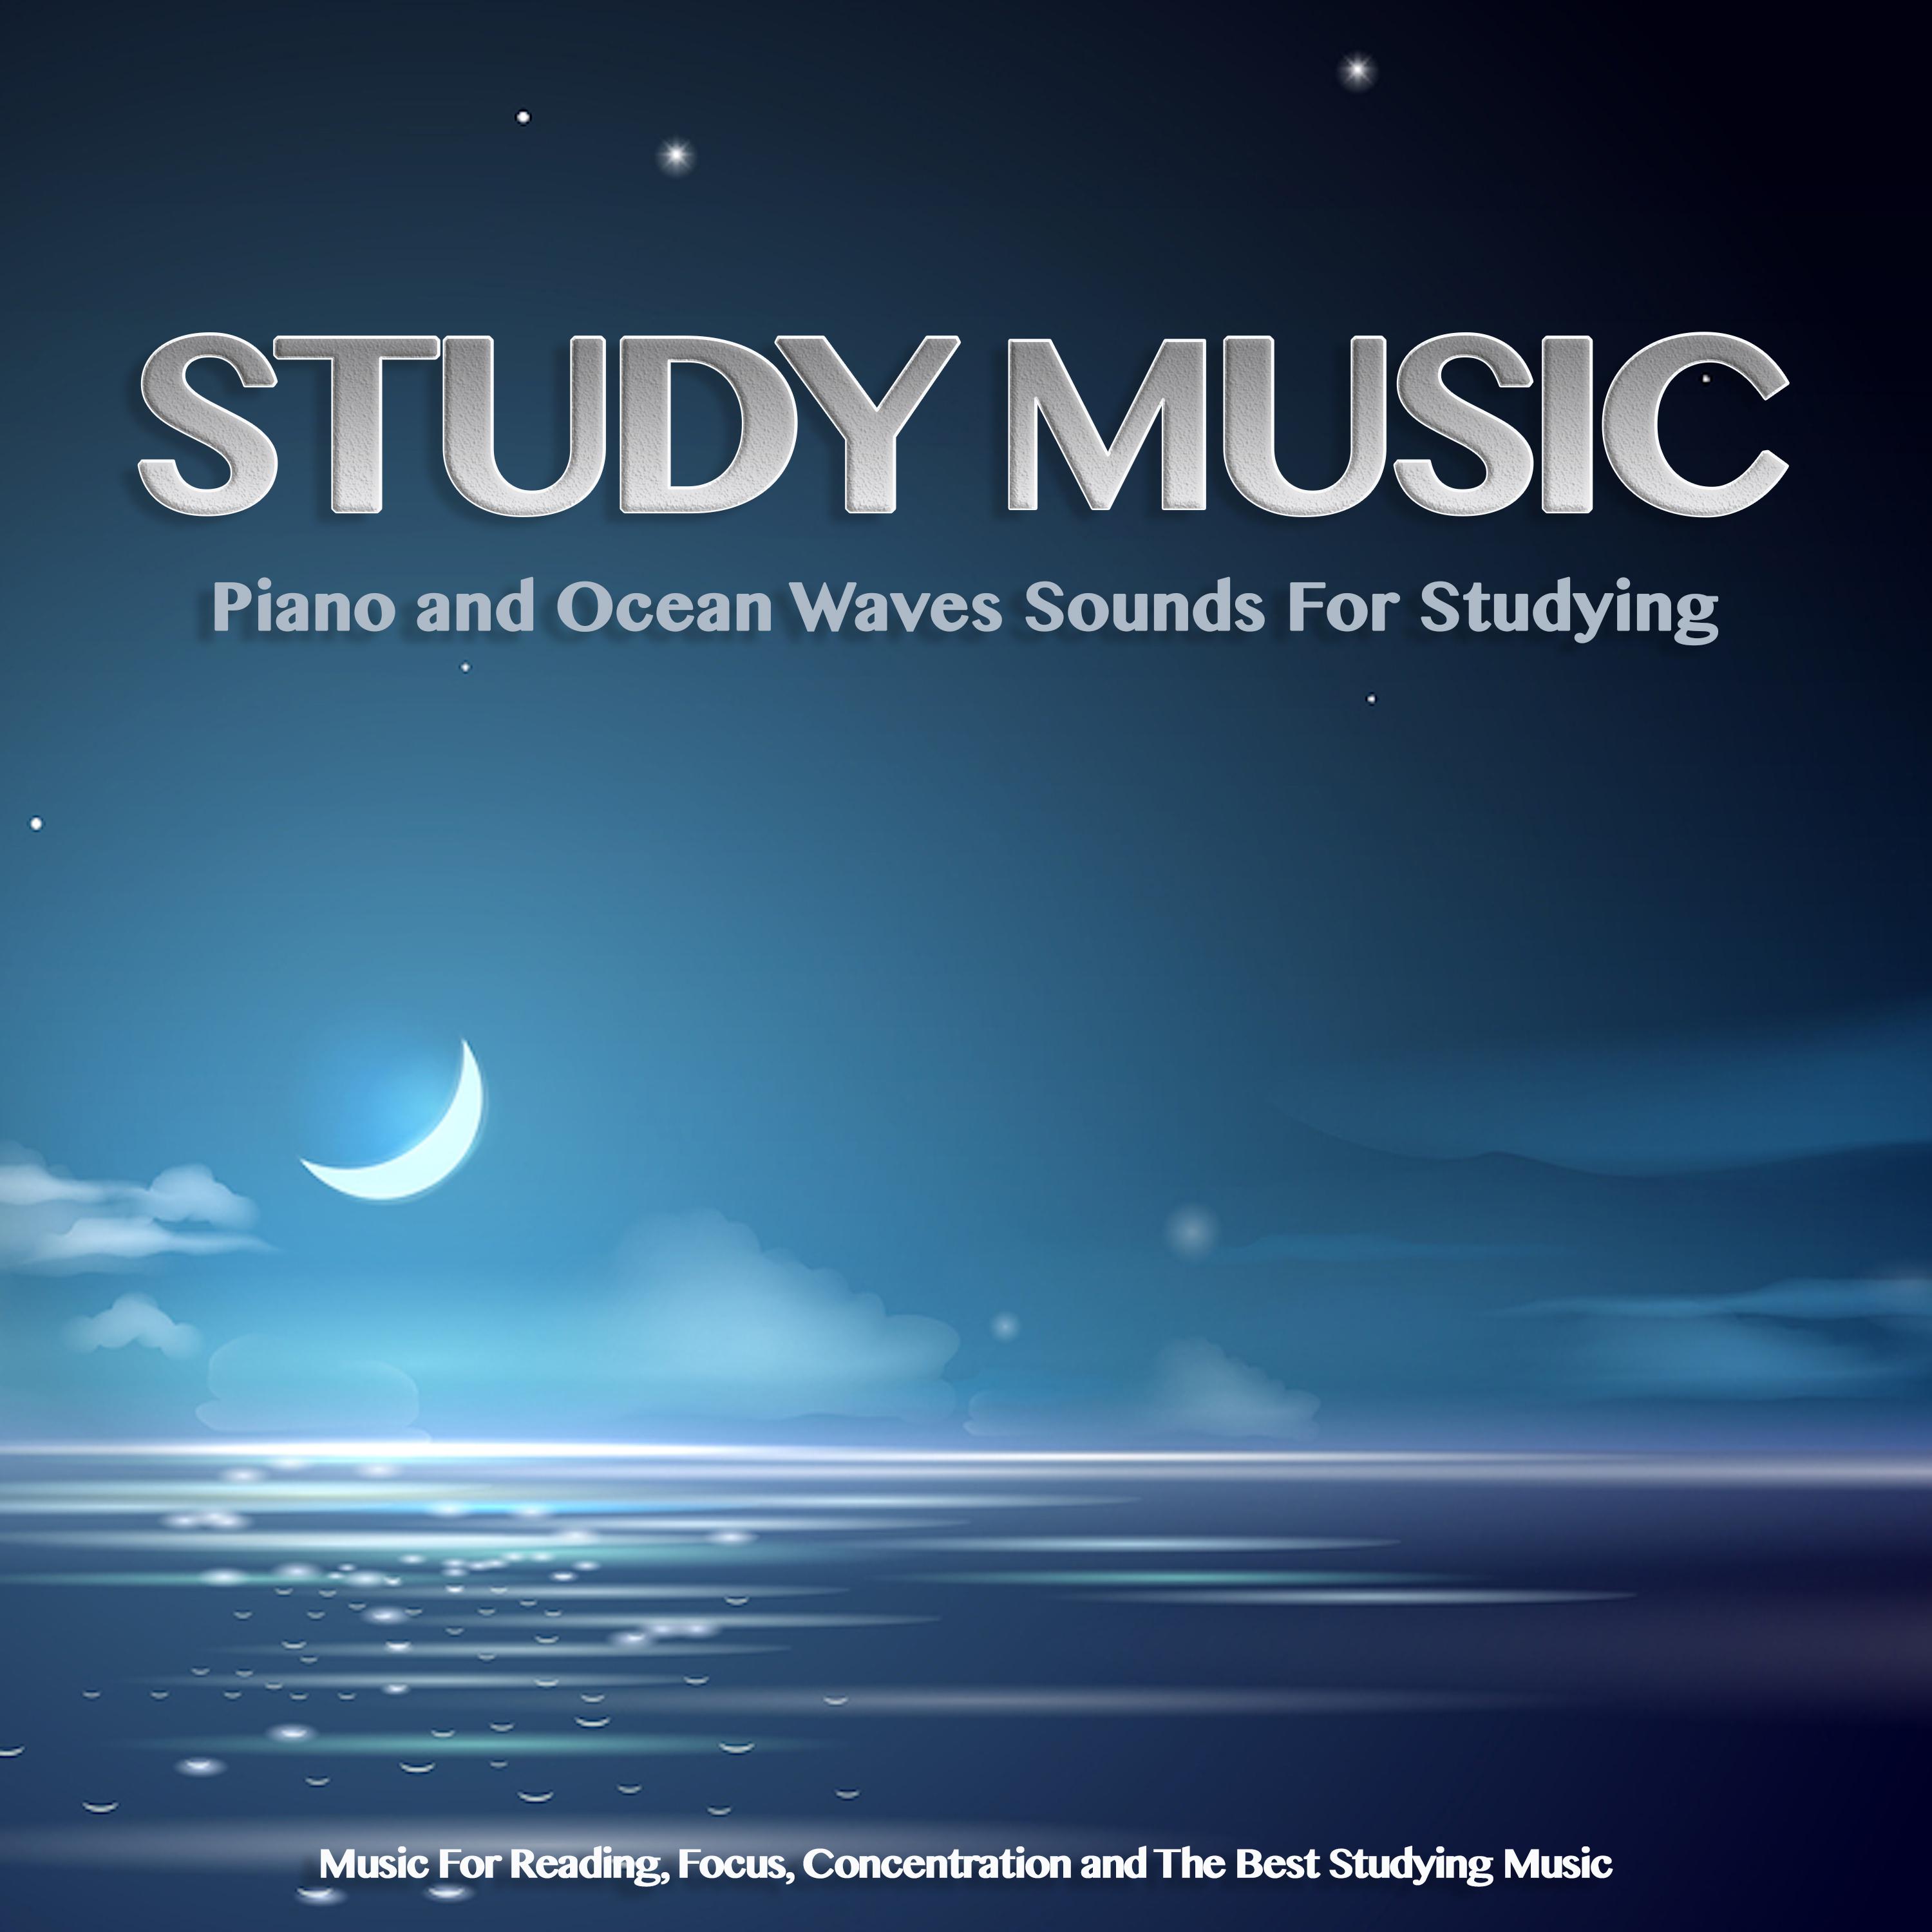 Music For Reading and Relaxation